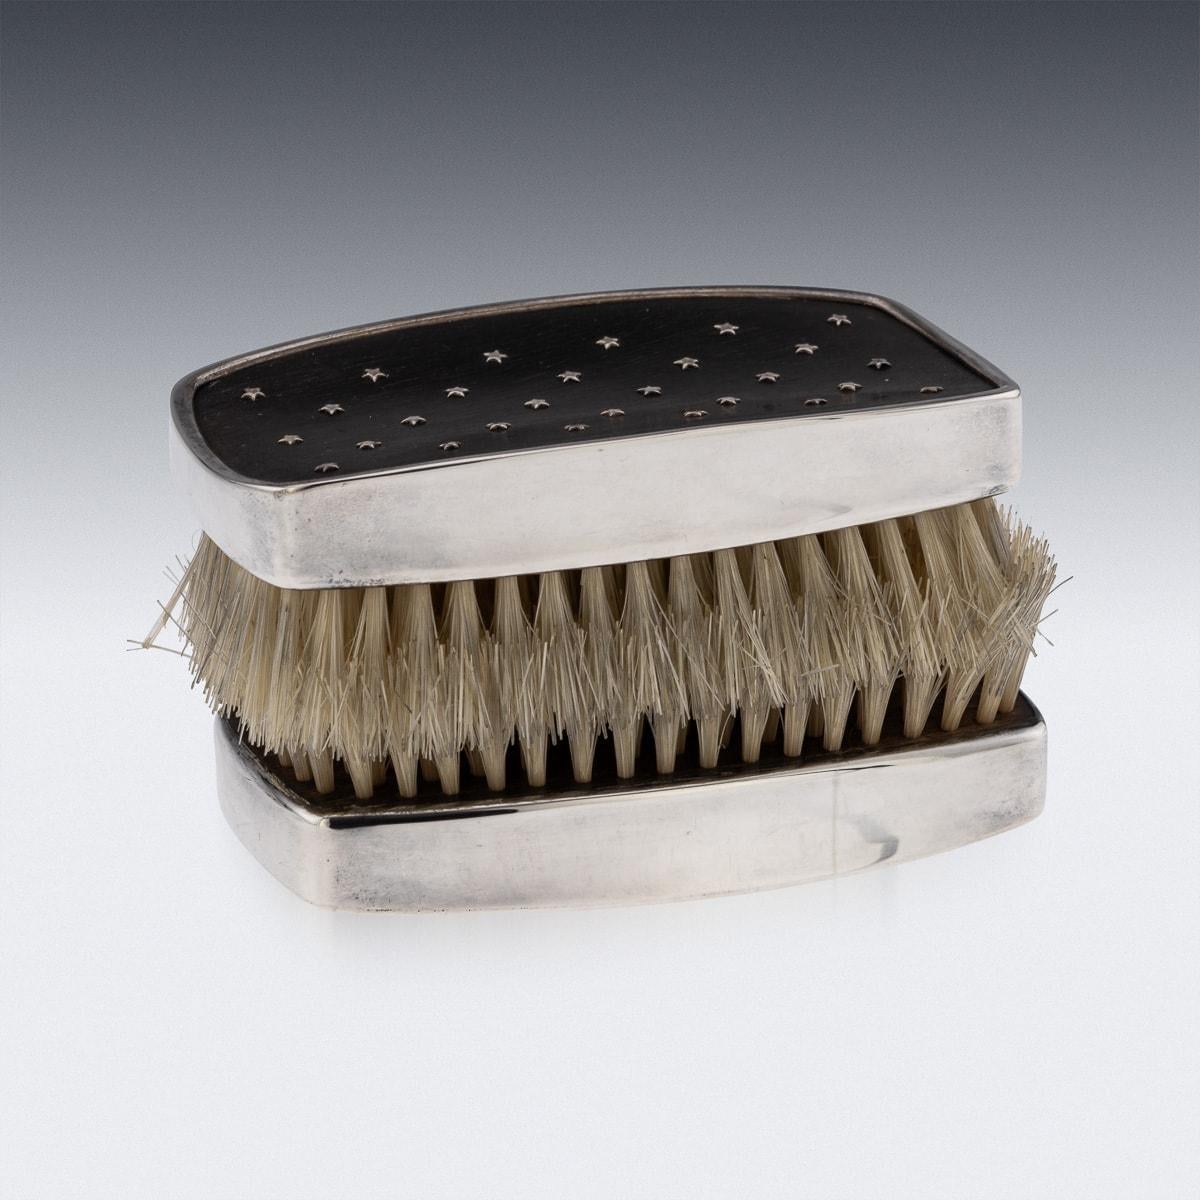 A pair of mid 20th Century English solid silver clothes brushes. The brushes feature a wooden handle which has a solid silver edge band. Throughout the top of the handle, there are small silver star shaped decorations imbedded into the wood finish.